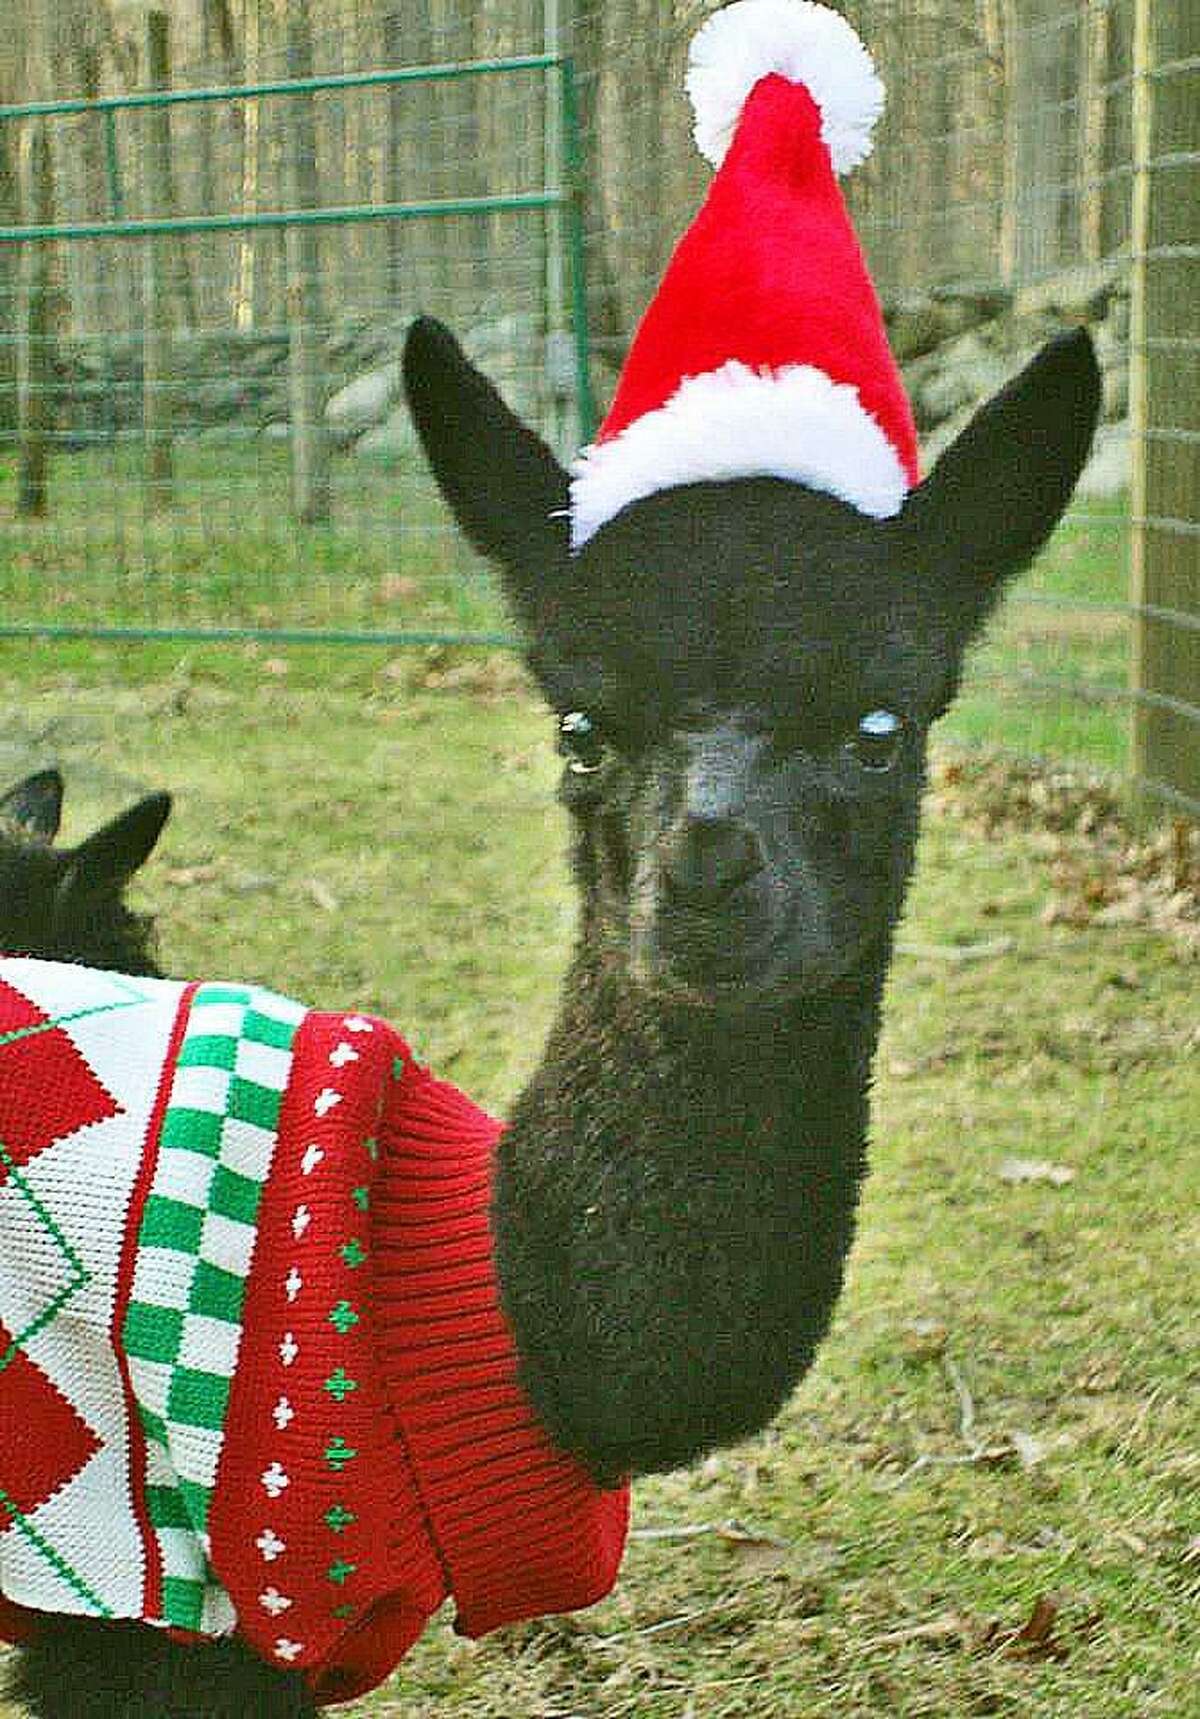 Outfitted for Christmas, Atala the alpaca greets visitors to Killingworth’s New England Alpacas.